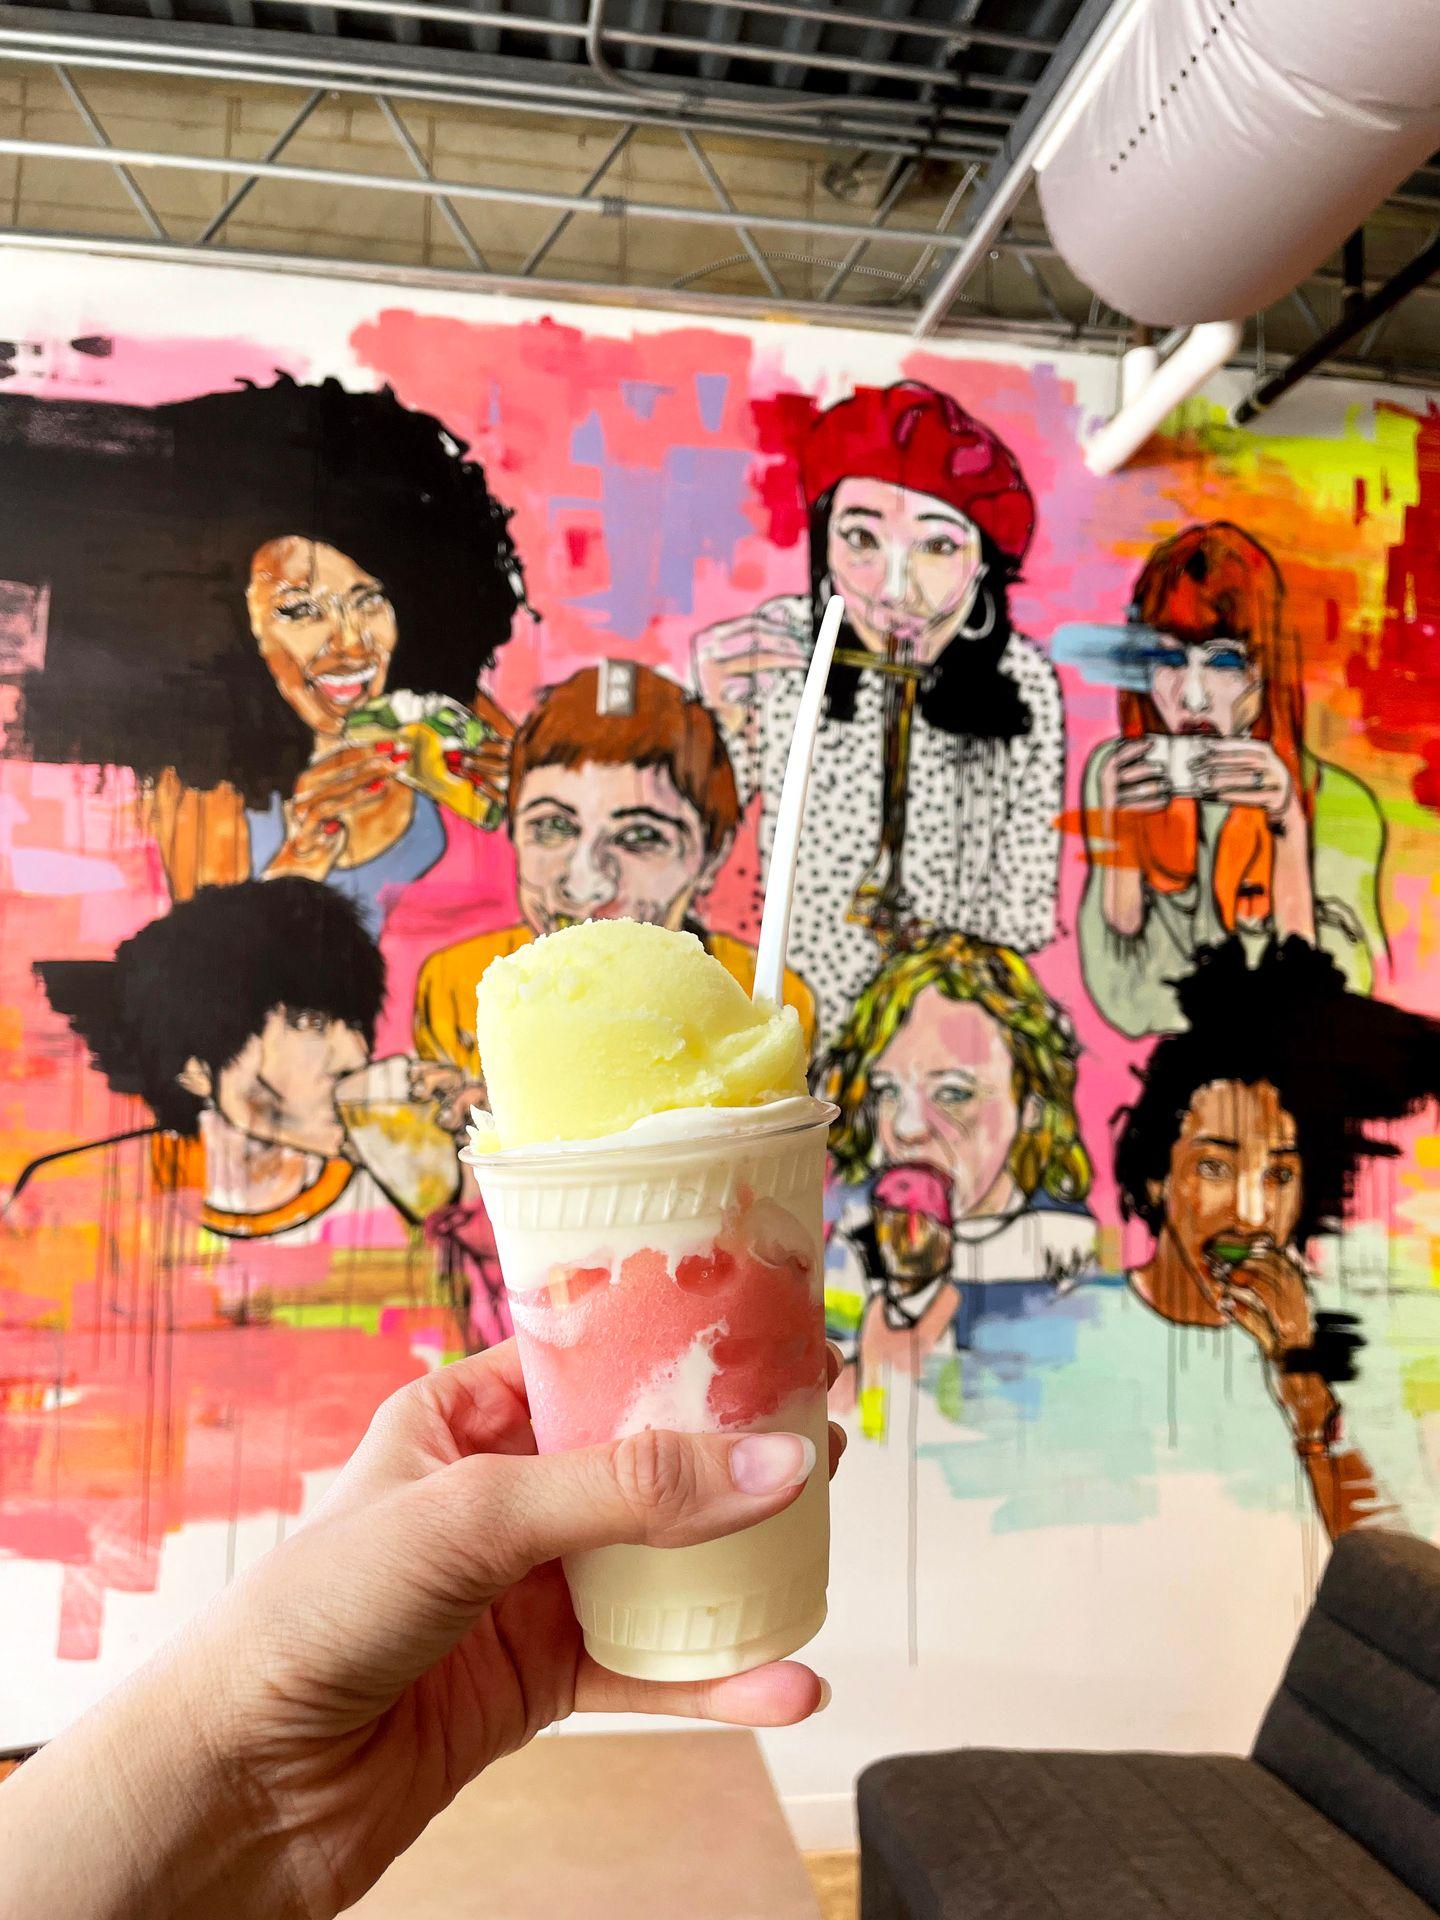 A cup with custard layered with pink and yellow Italian ice. There is a colorful mural in the background.